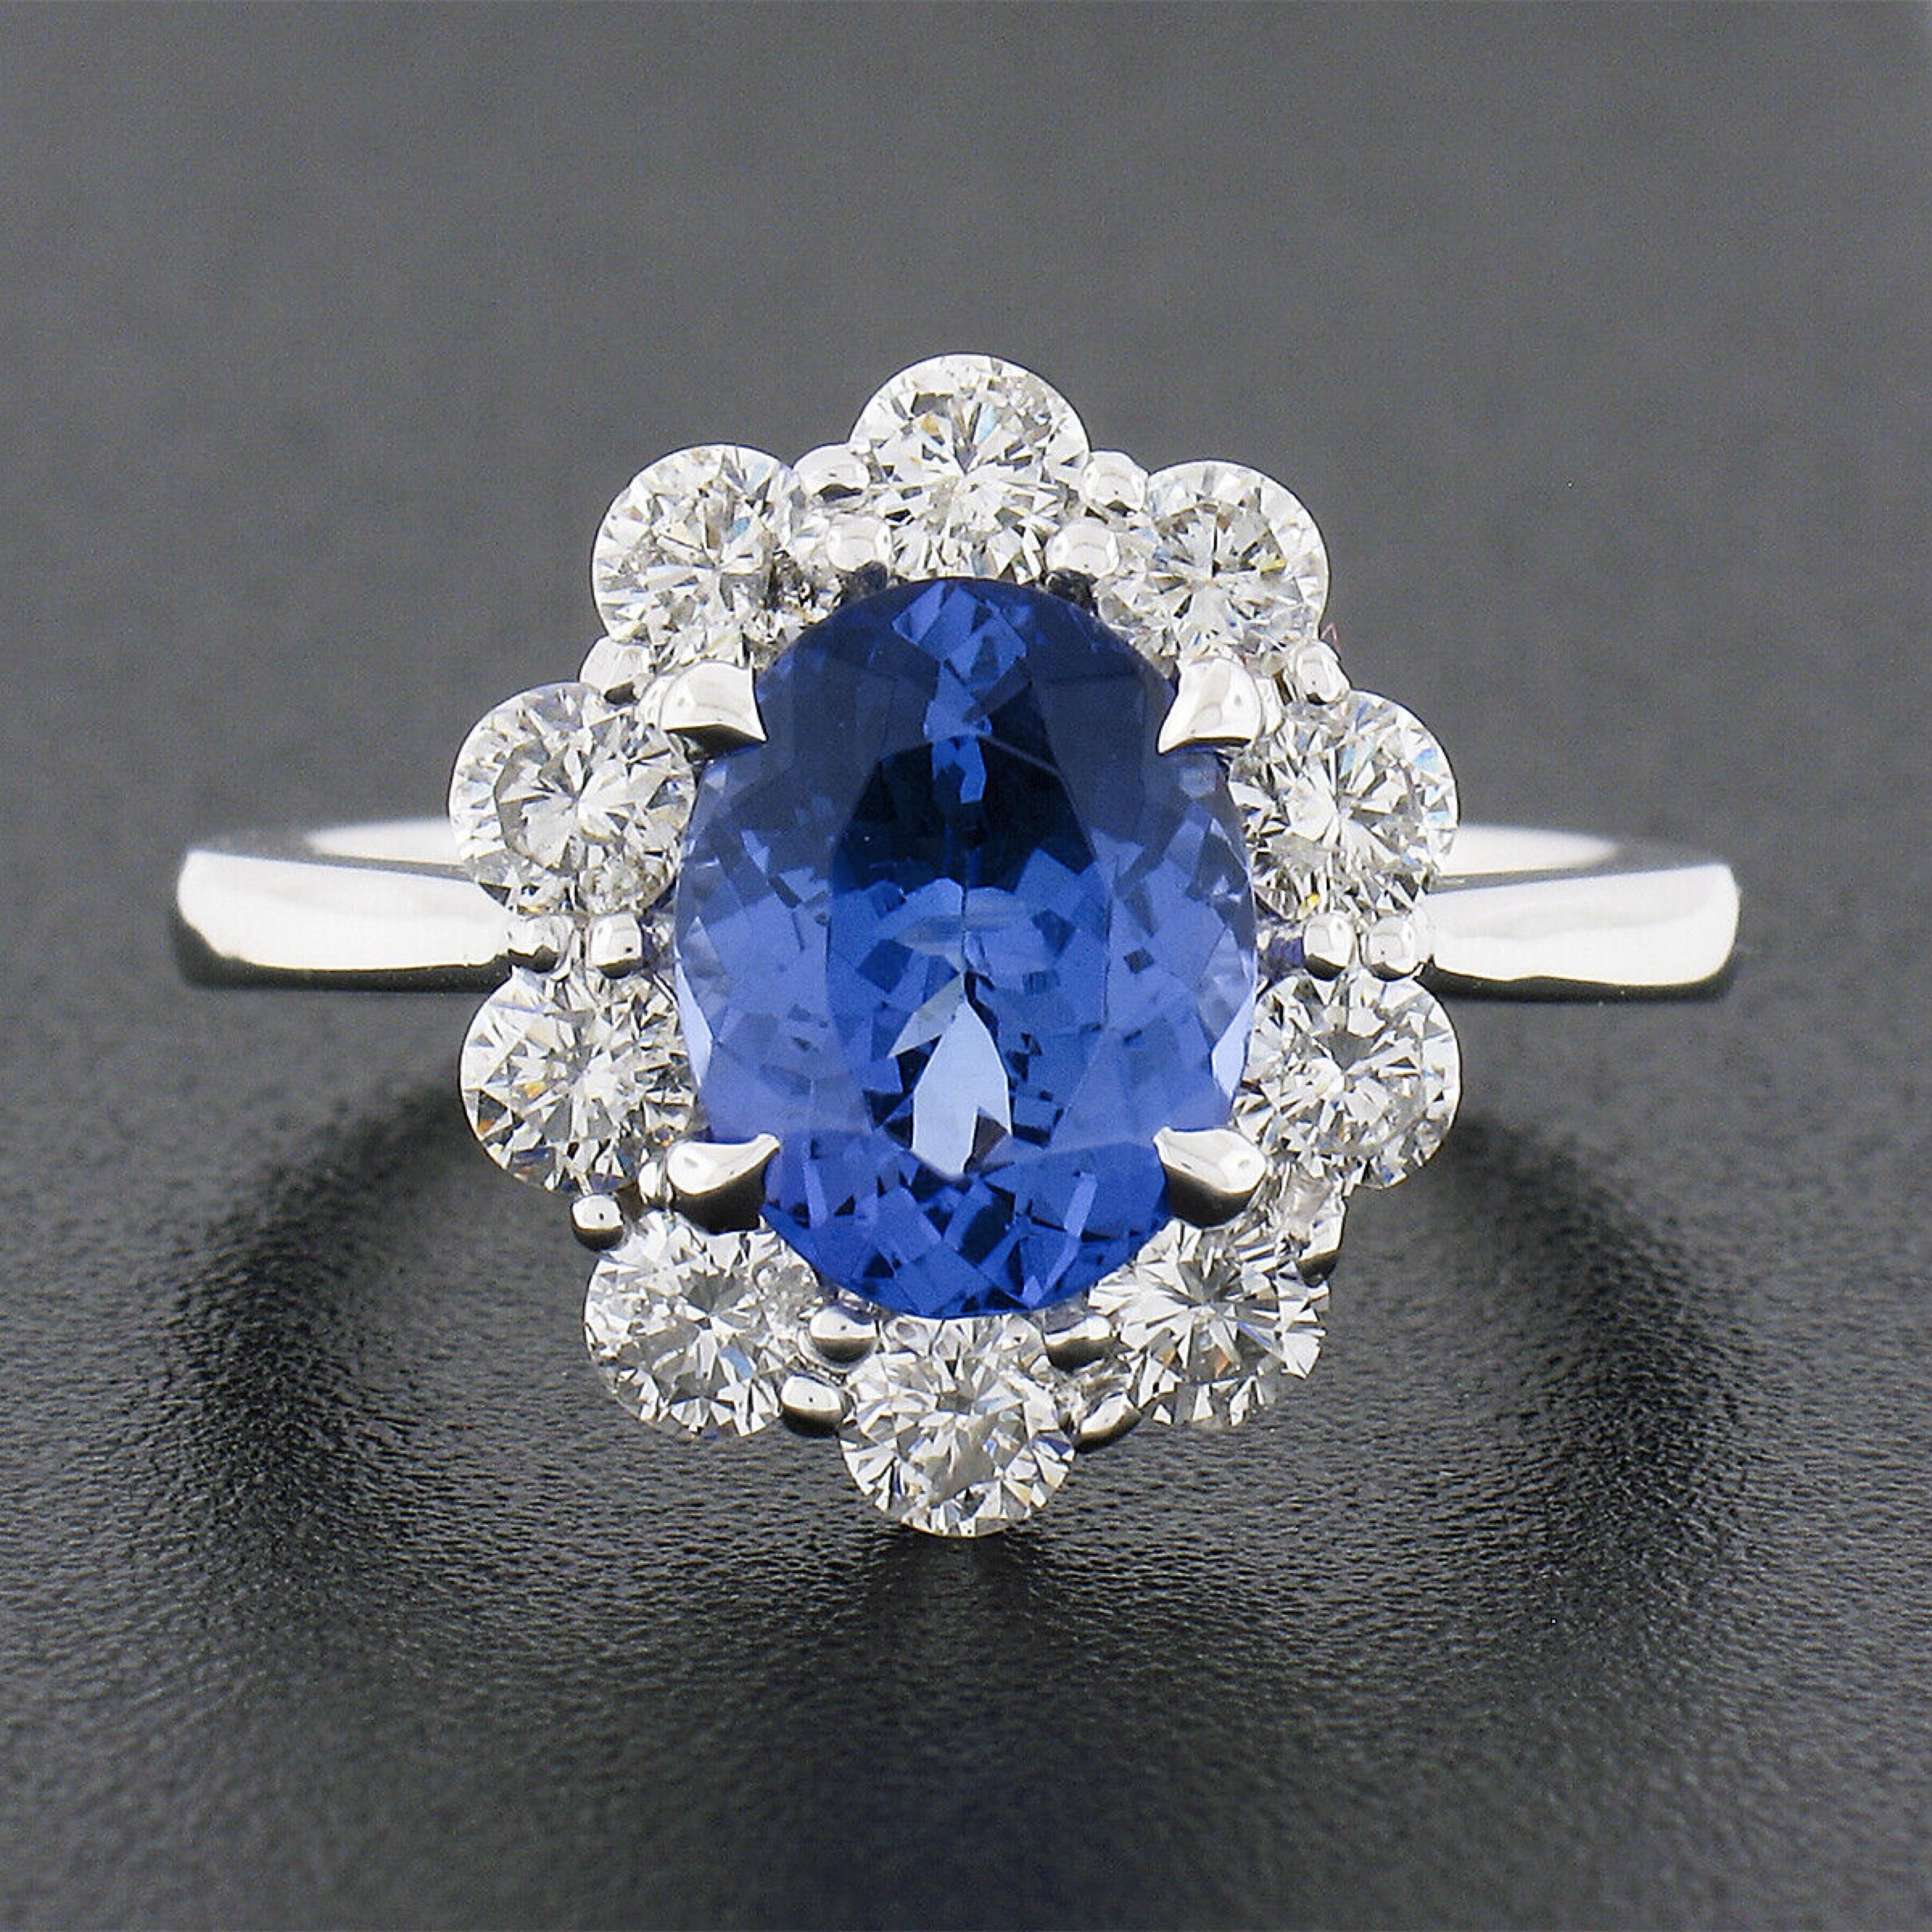 This magnificent tanzanite and diamond engagement ring is newly crafted from solid 14k white gold and features a gorgeous blueish violet tanzanite prong set at its center. The tanzanite is oval brilliant cut and weighs exactly 1.87 carats.